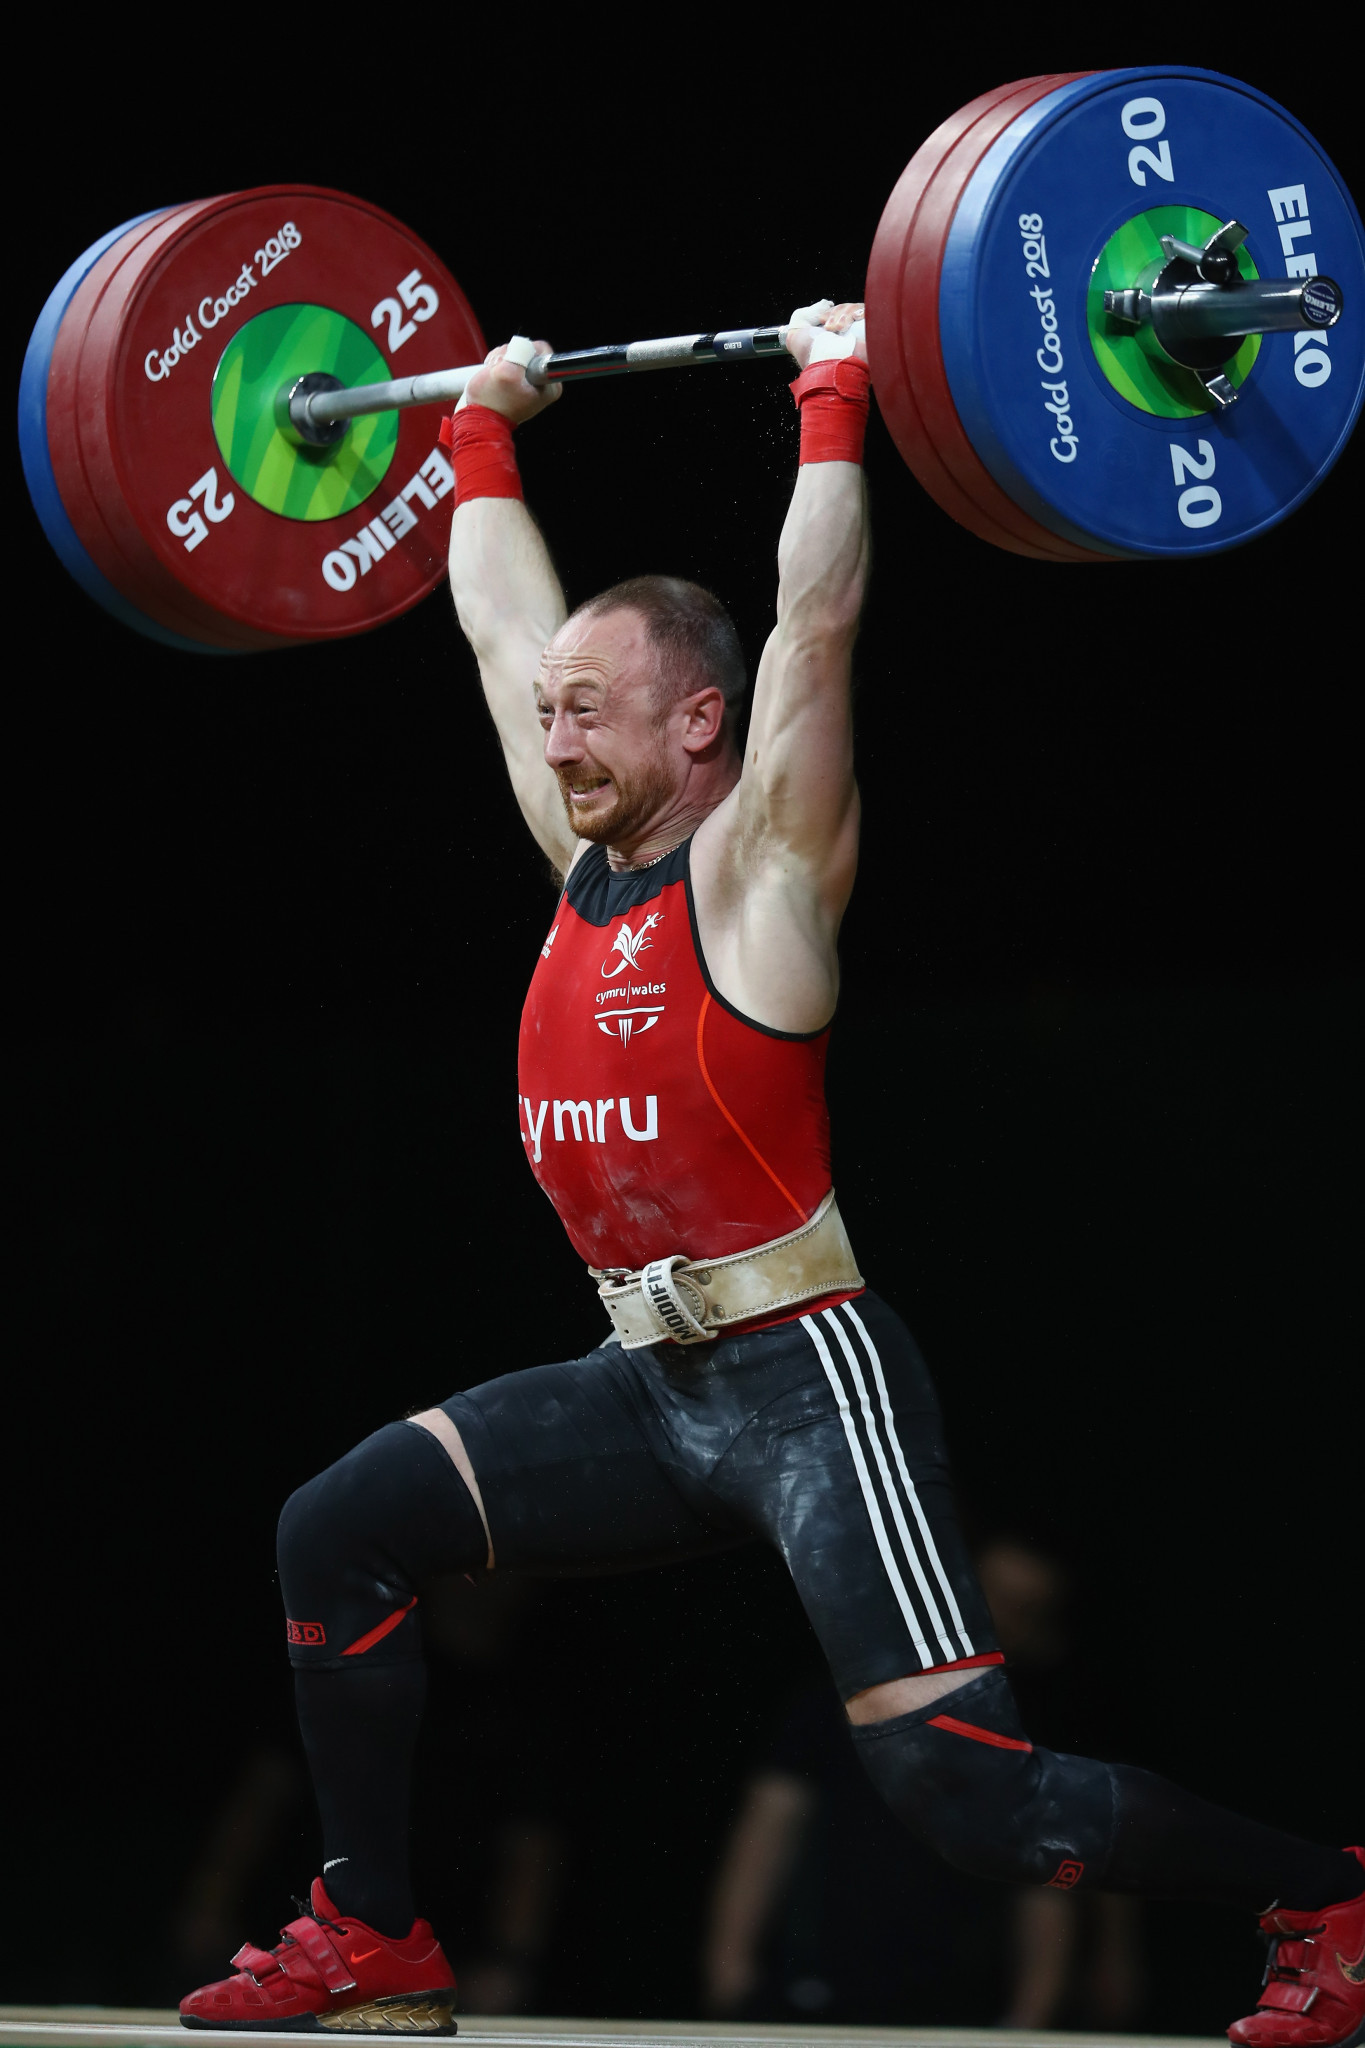 Gareth Evans secured Wales' first gold medal of Gold Coast 2018 with a dramatic victory in the men's 69kg event ©Getty Images